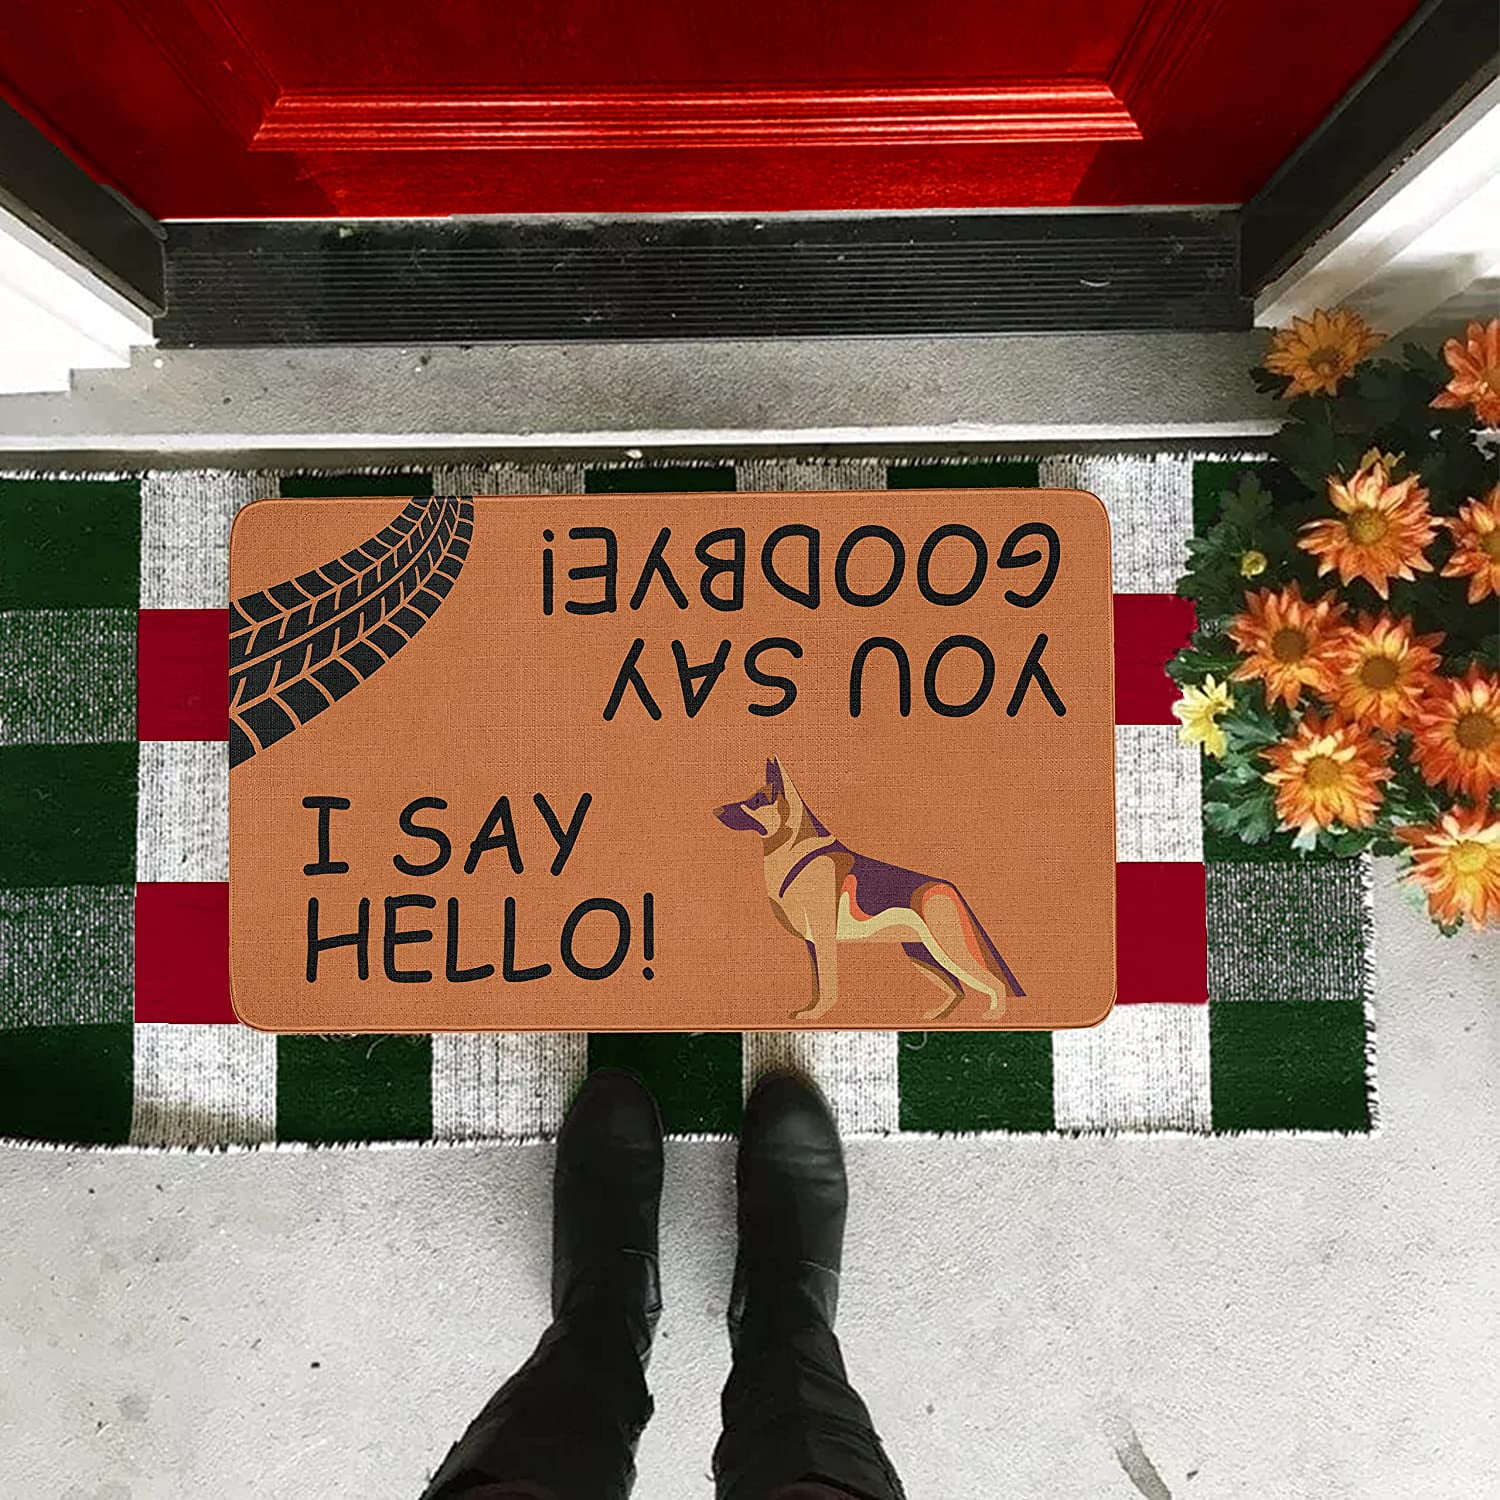  Small Welcome Mat Definitely Not A Trap Door Mat Retro Room  Decor Front Porch Mat Outdoor ( Size : 50X80CM ) : Home & Kitchen